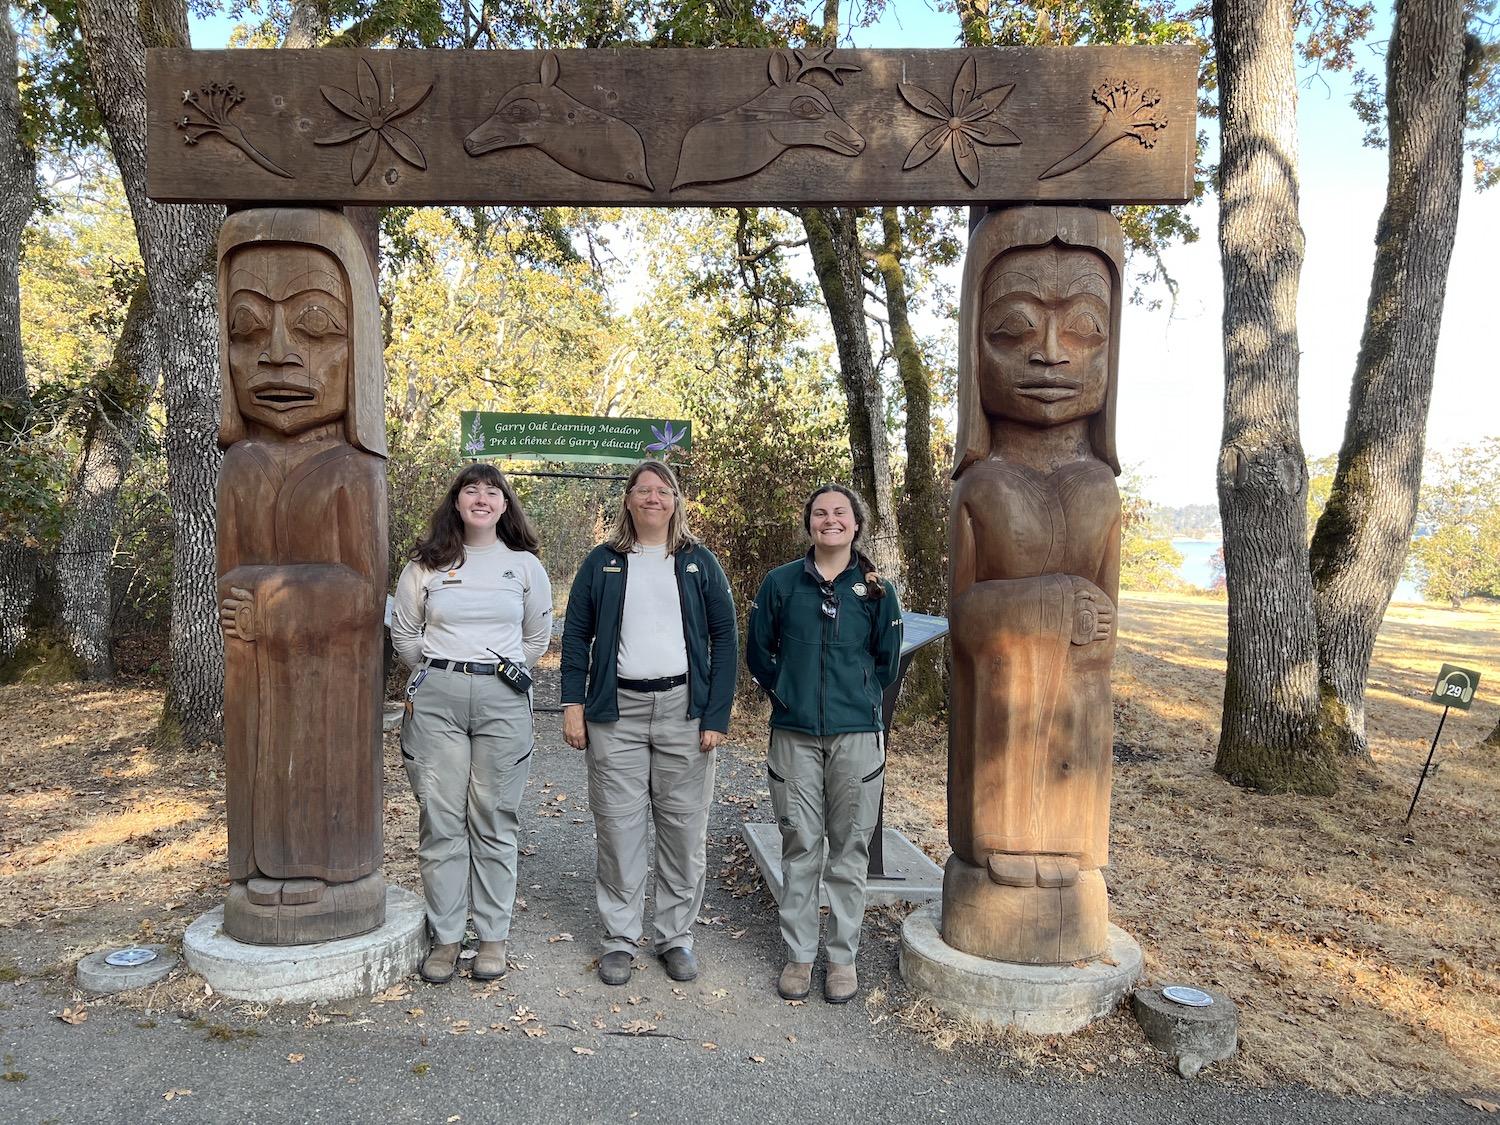 At the entrance to the Garry Oak Learning Meadow, Parks Canada's Anna Lee, Aimée Pelletier and Ashley Everitt stand under the welcome arch carved by Tom LaFortune.